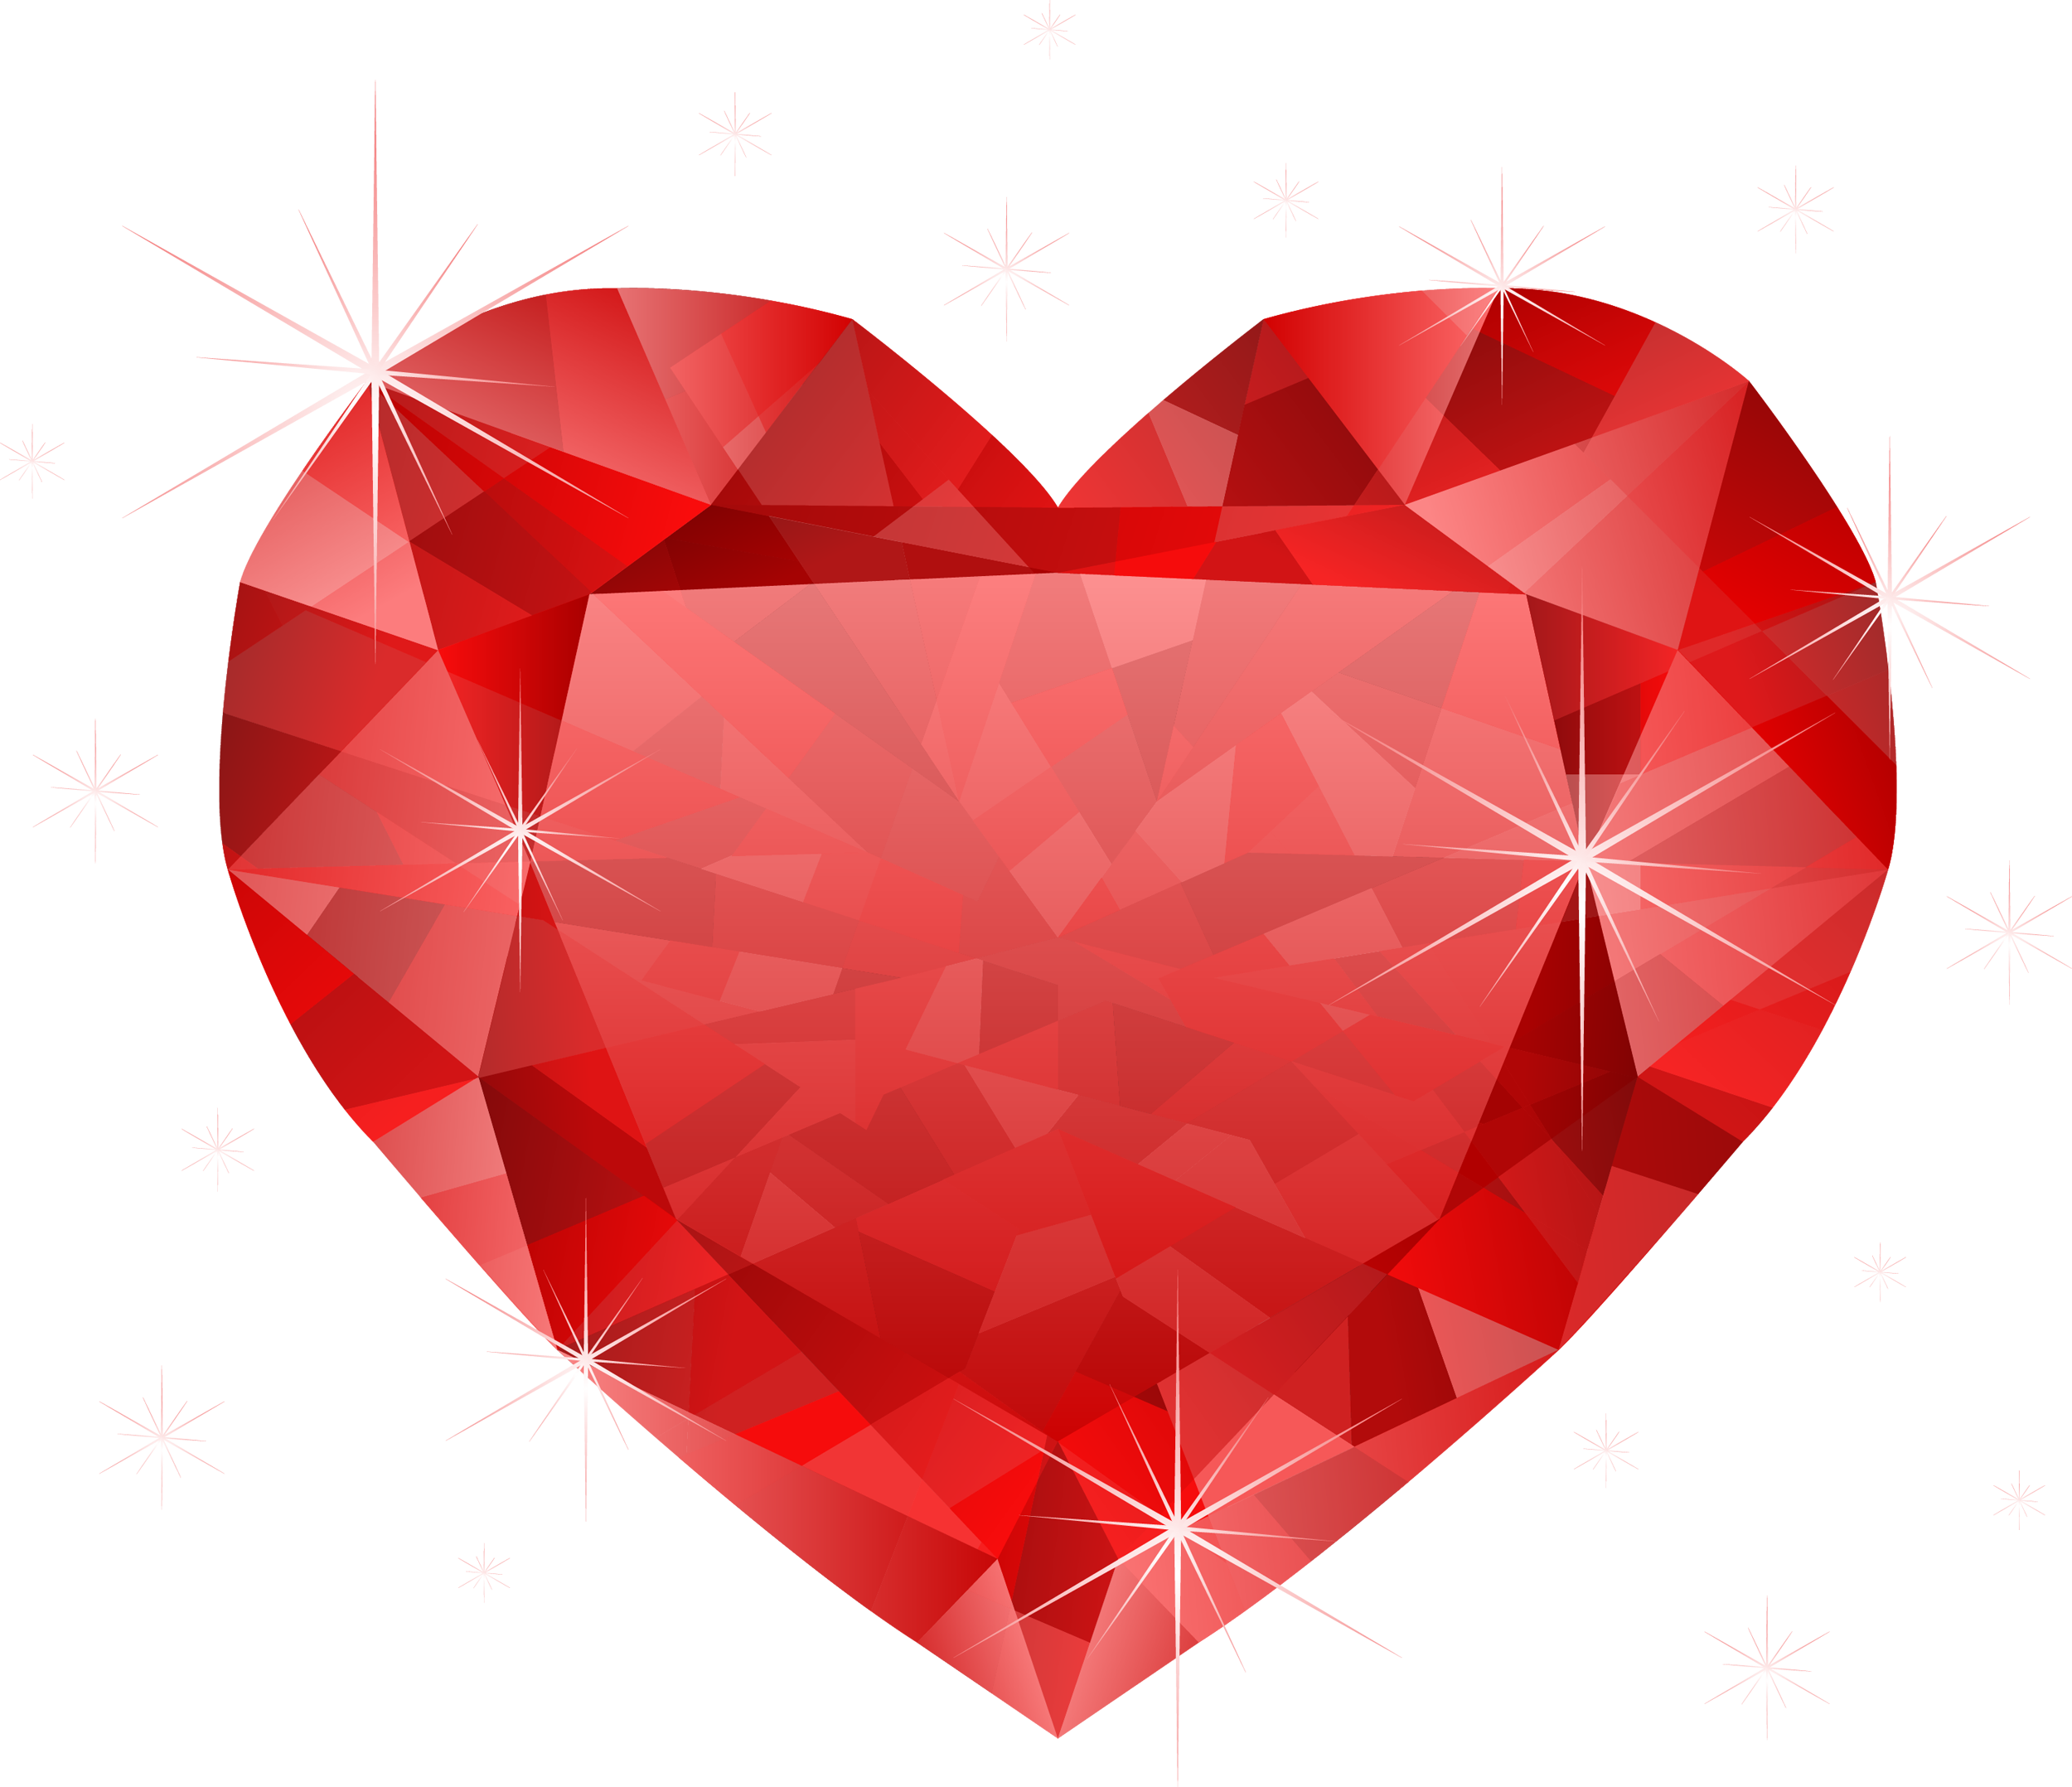 Red Heart PNG Photo